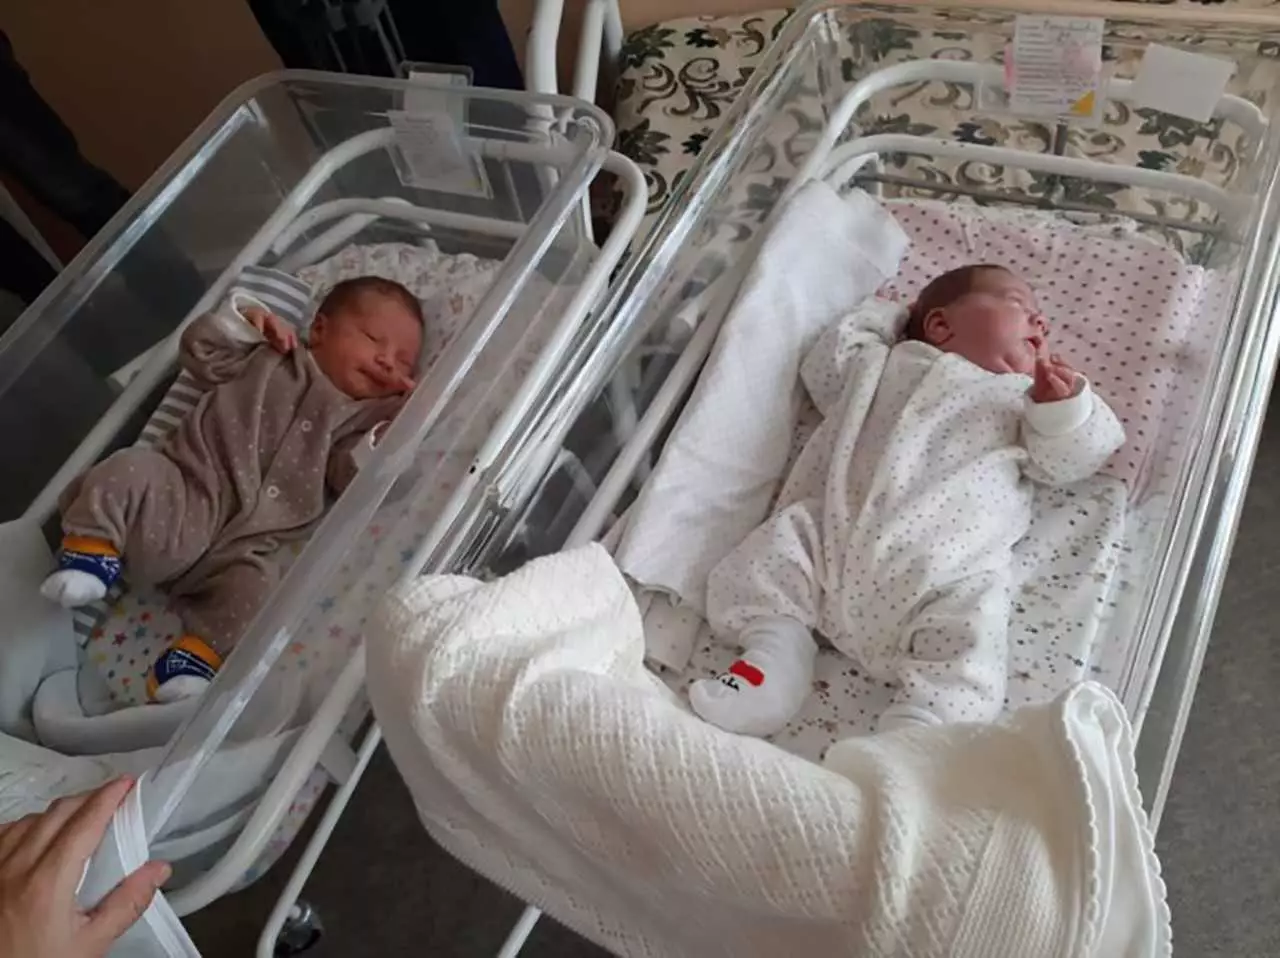 A woman in Kazakhstan has given birth to twins 11 weeks apart.